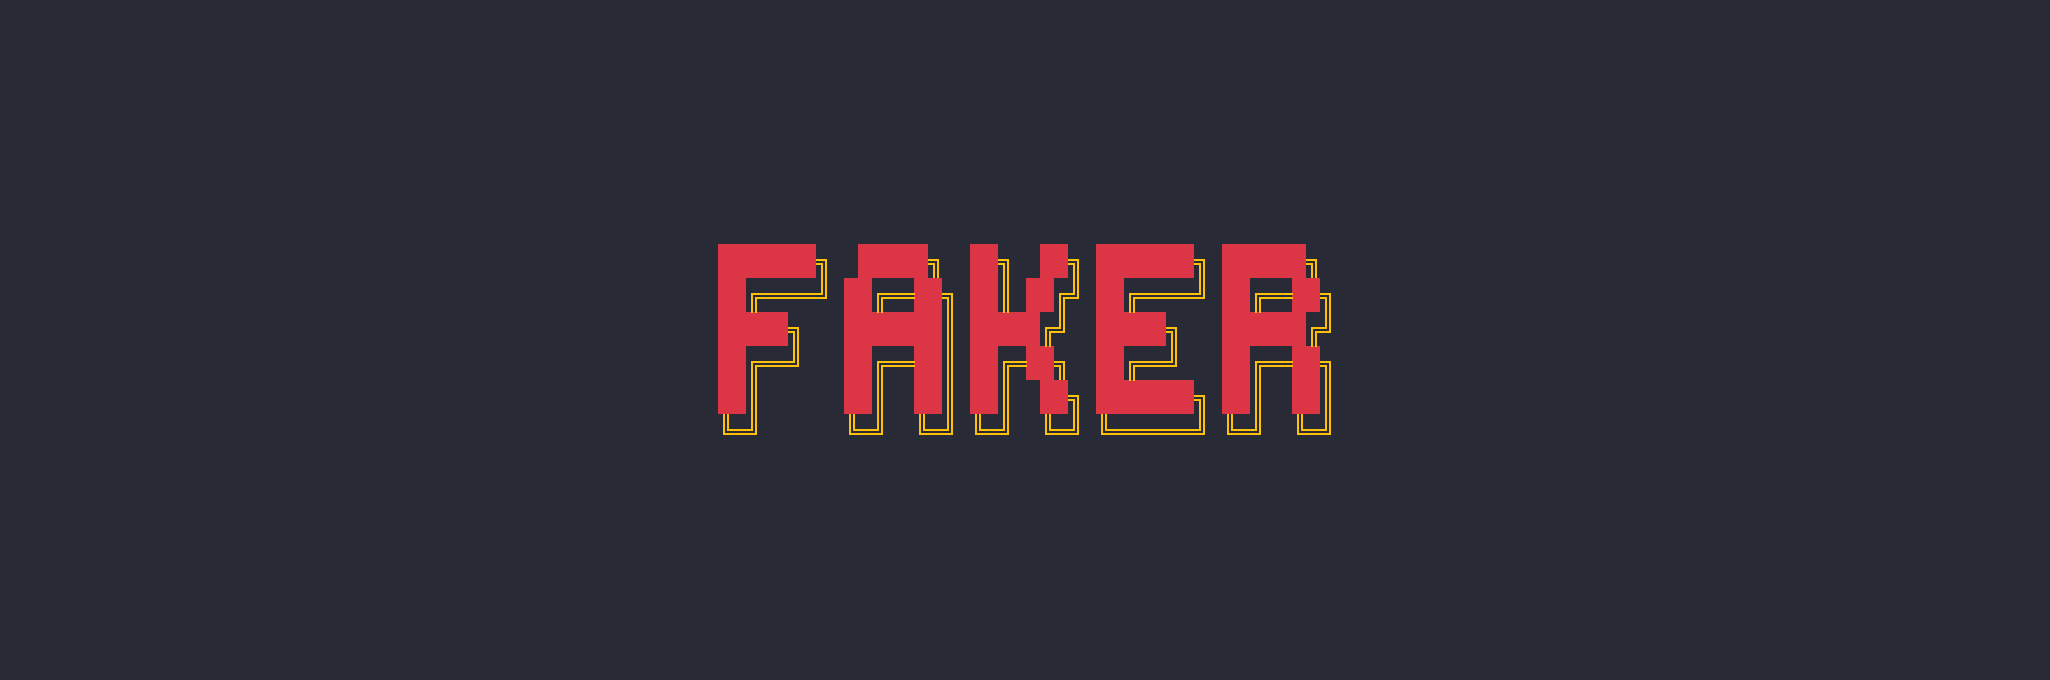 GitHub - pfaciana/faker-js-extensions: This adds additional methods to faker .js to generate massive amounts of realistic fake data in Node.js and the  browser